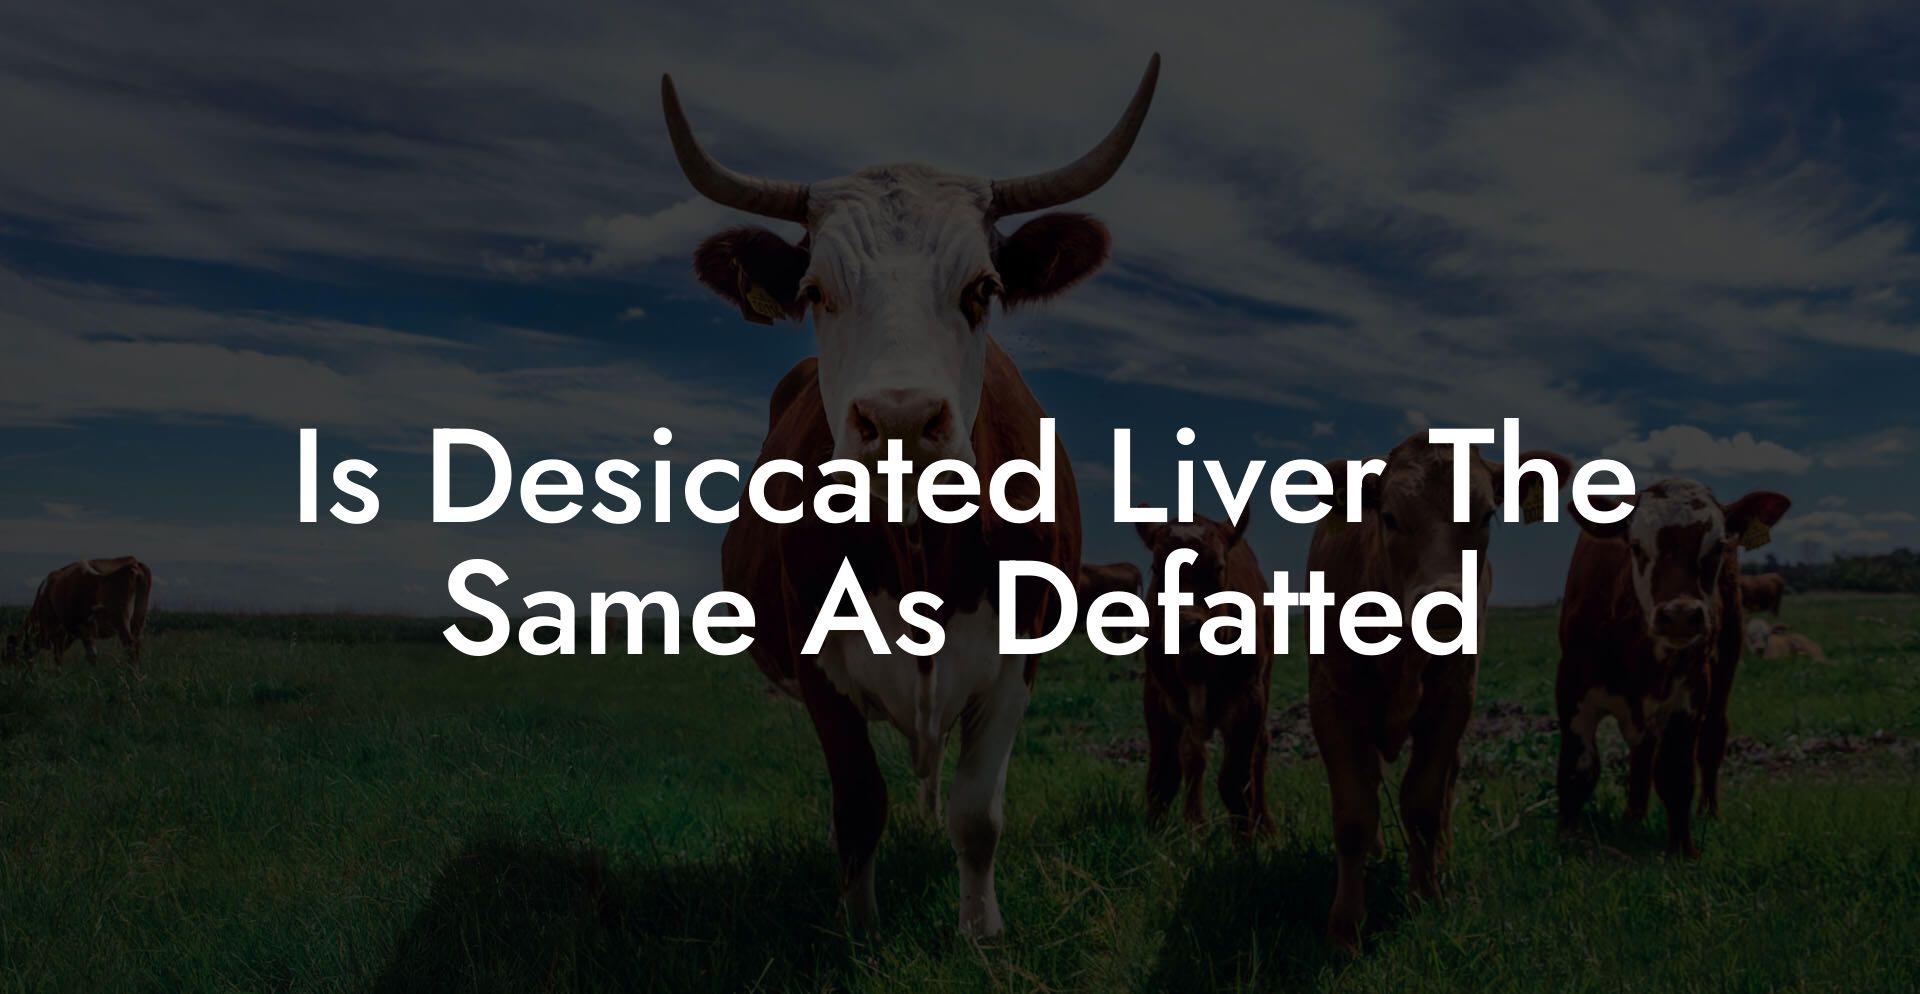 Is Desiccated Liver The Same As Defatted